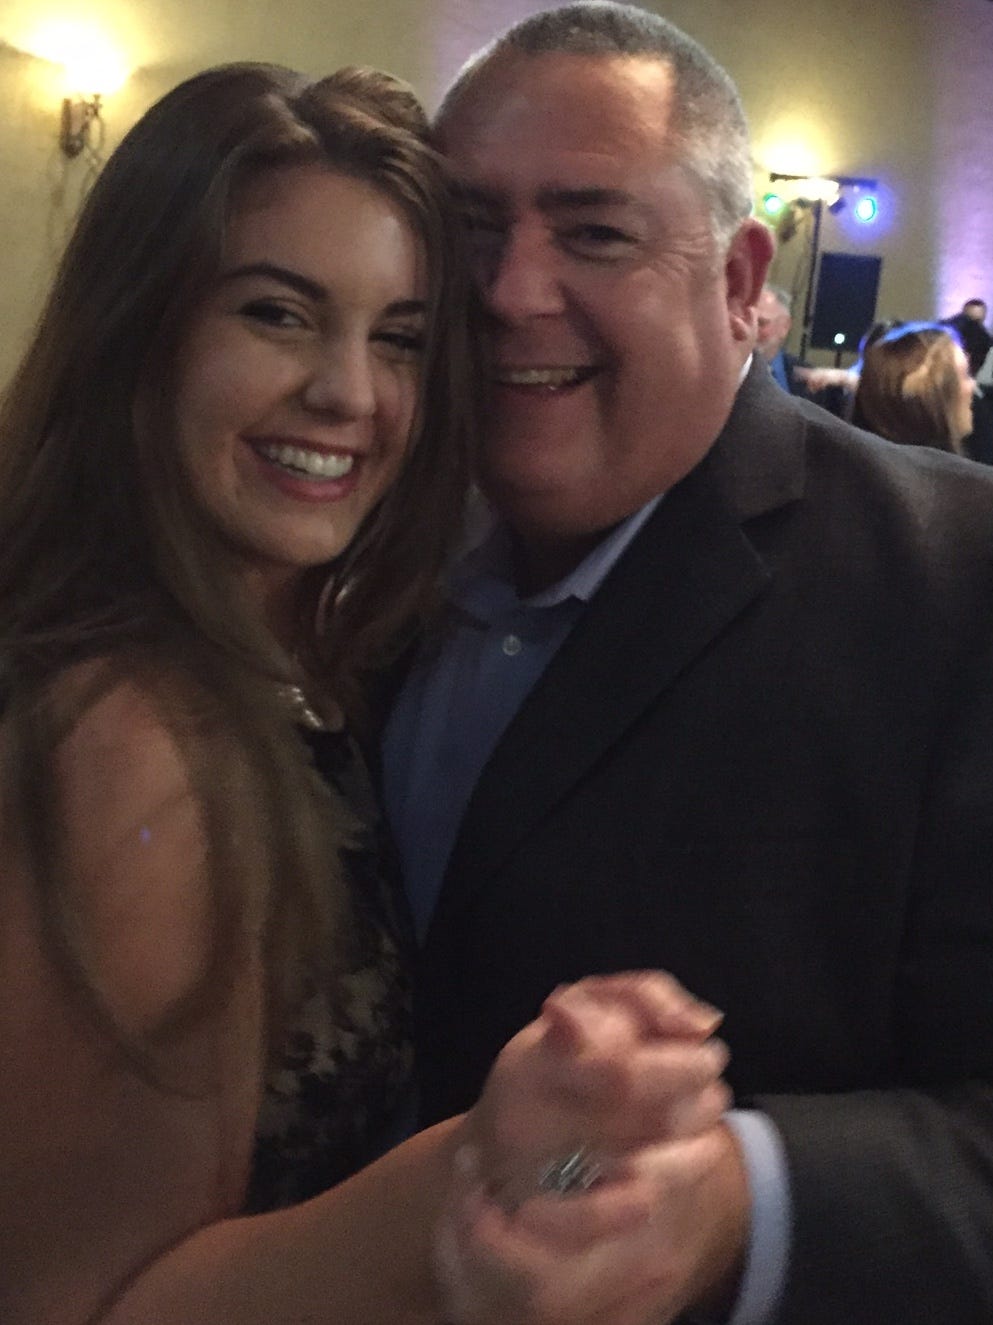 The author and her dad, dancing at a wedding